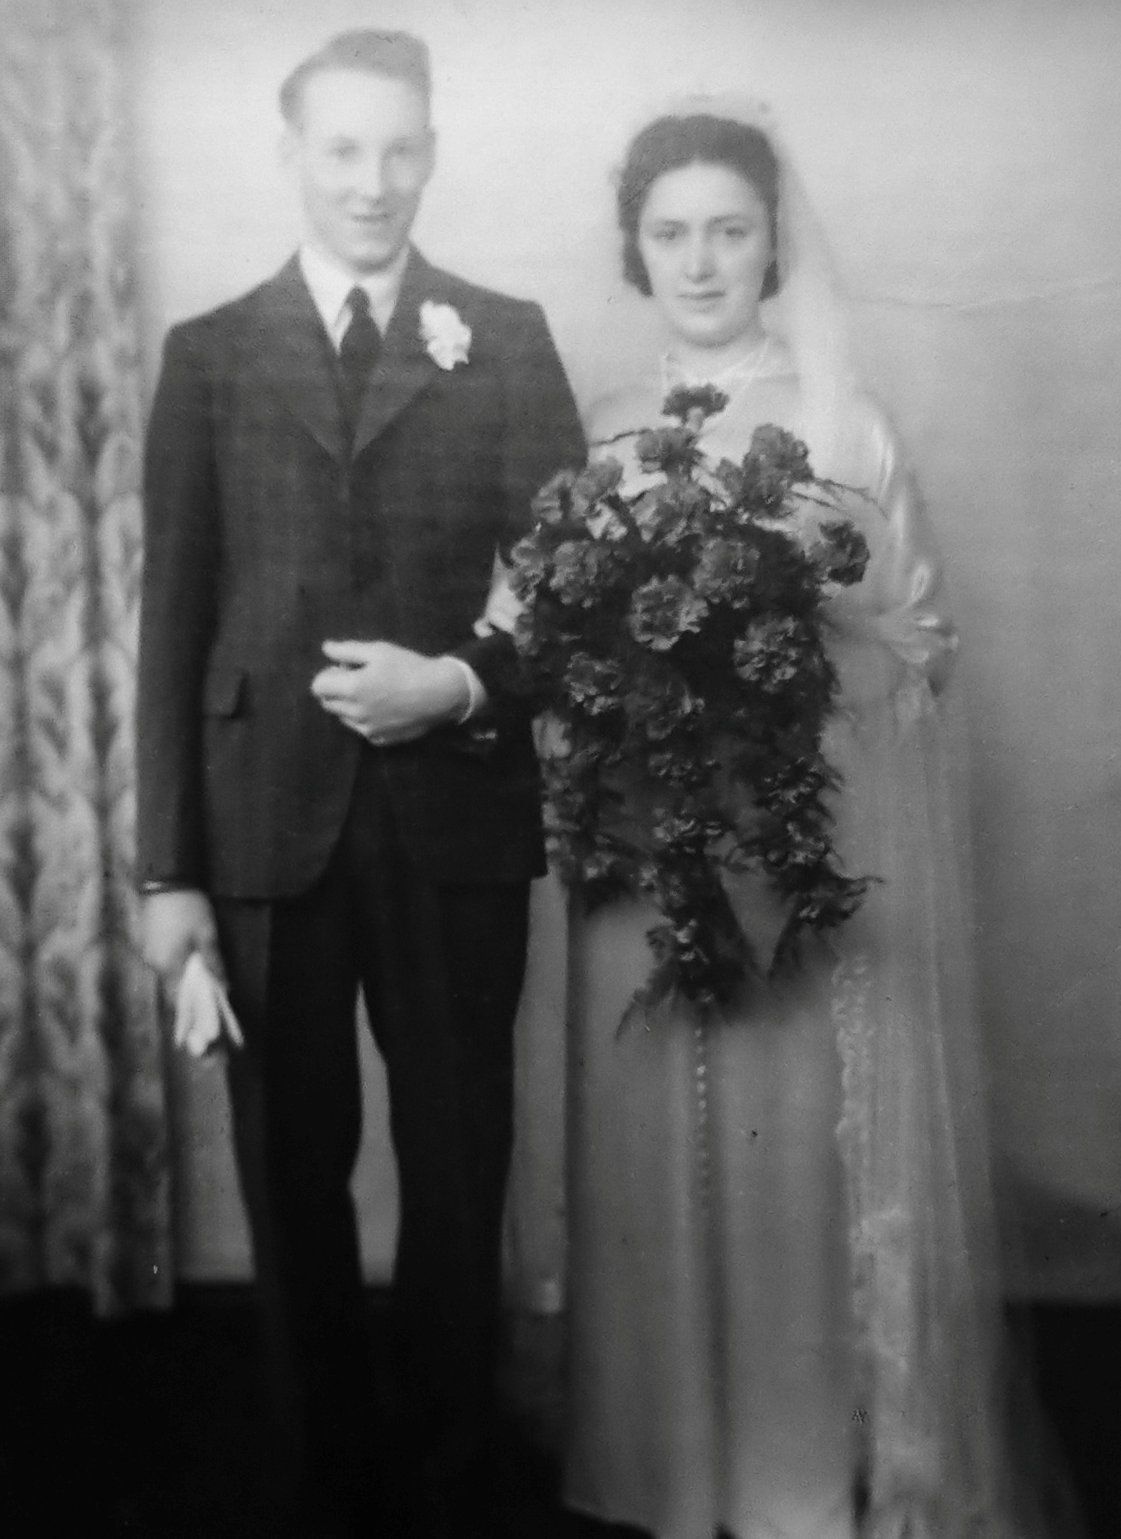 Kent couple - 103 and 102 - married 81 years believed to be Britain's oldest couple